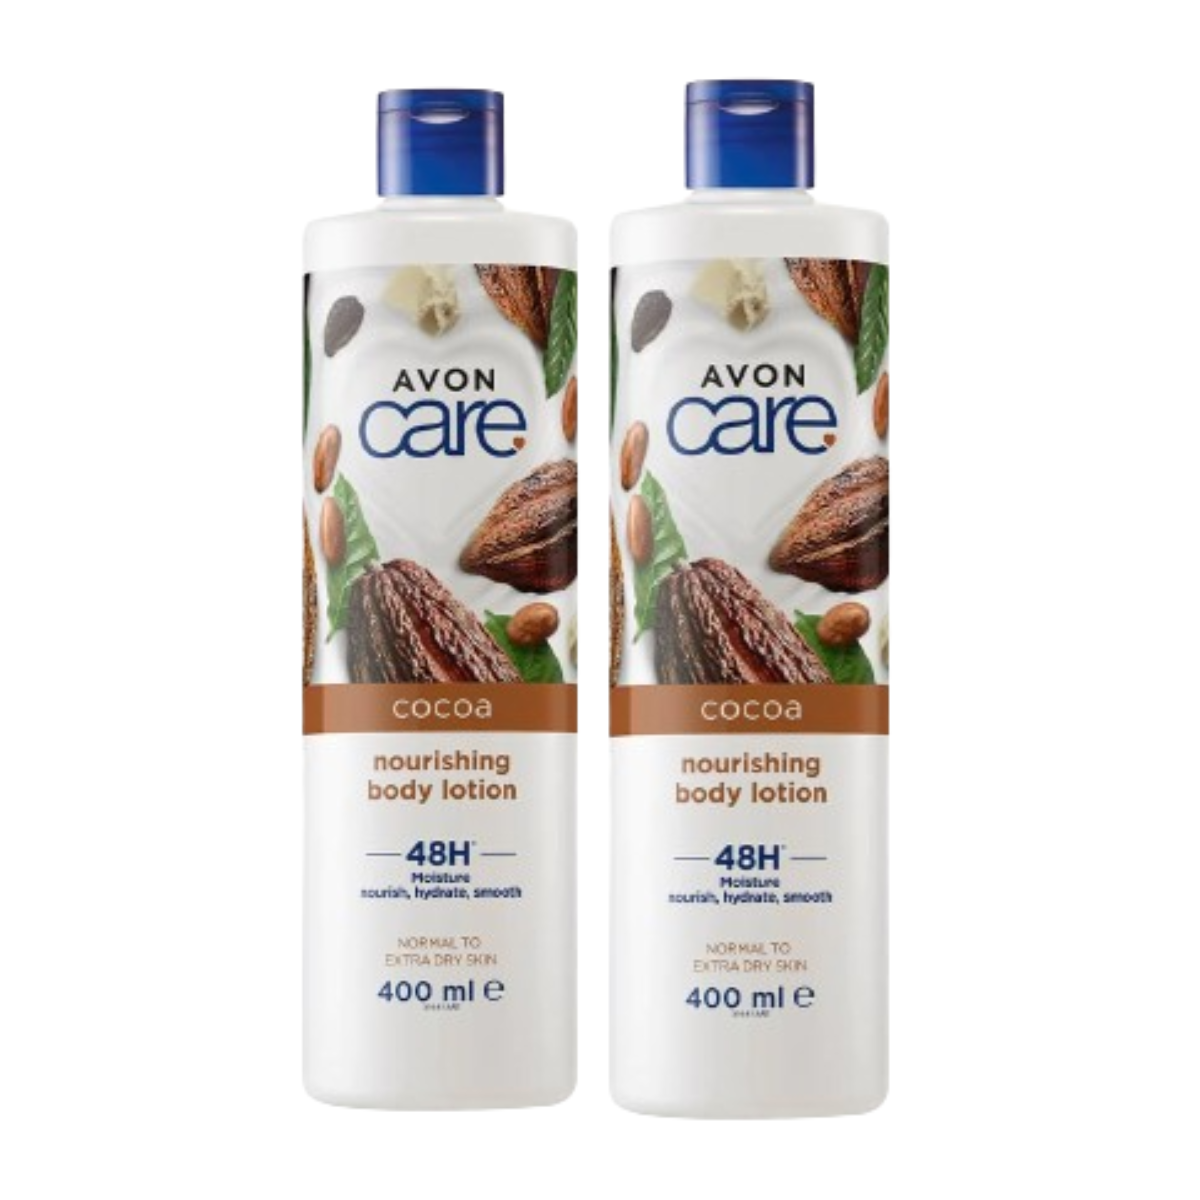 Avon Care Cocoa Butter Nourishing Body Lotion 400ml Pack of 2